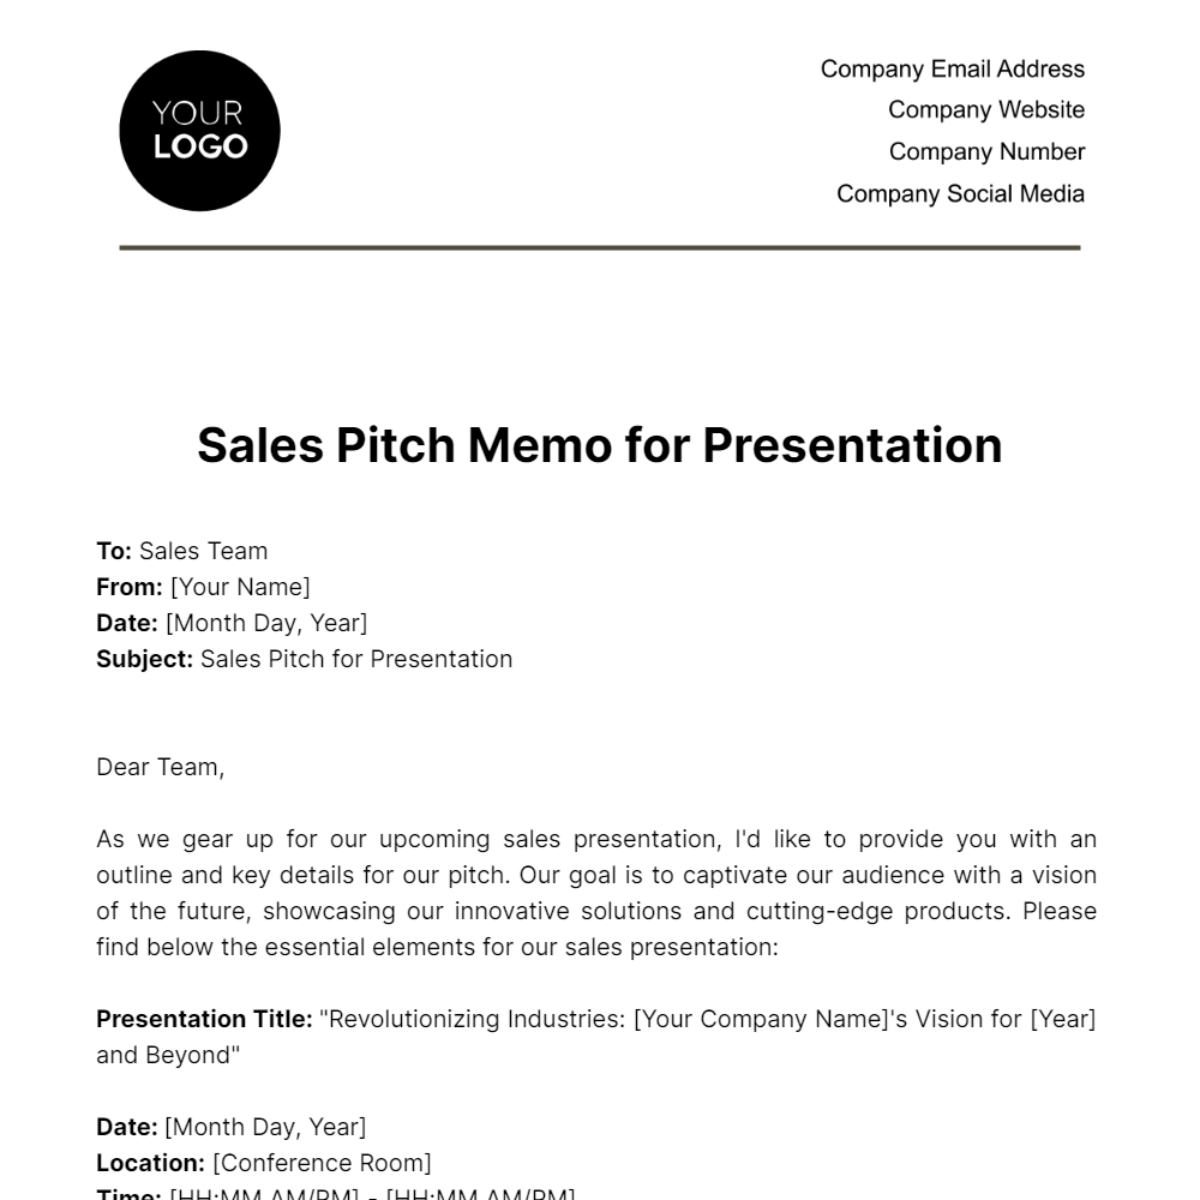 Free Sales Pitch Memo for Presentation Template